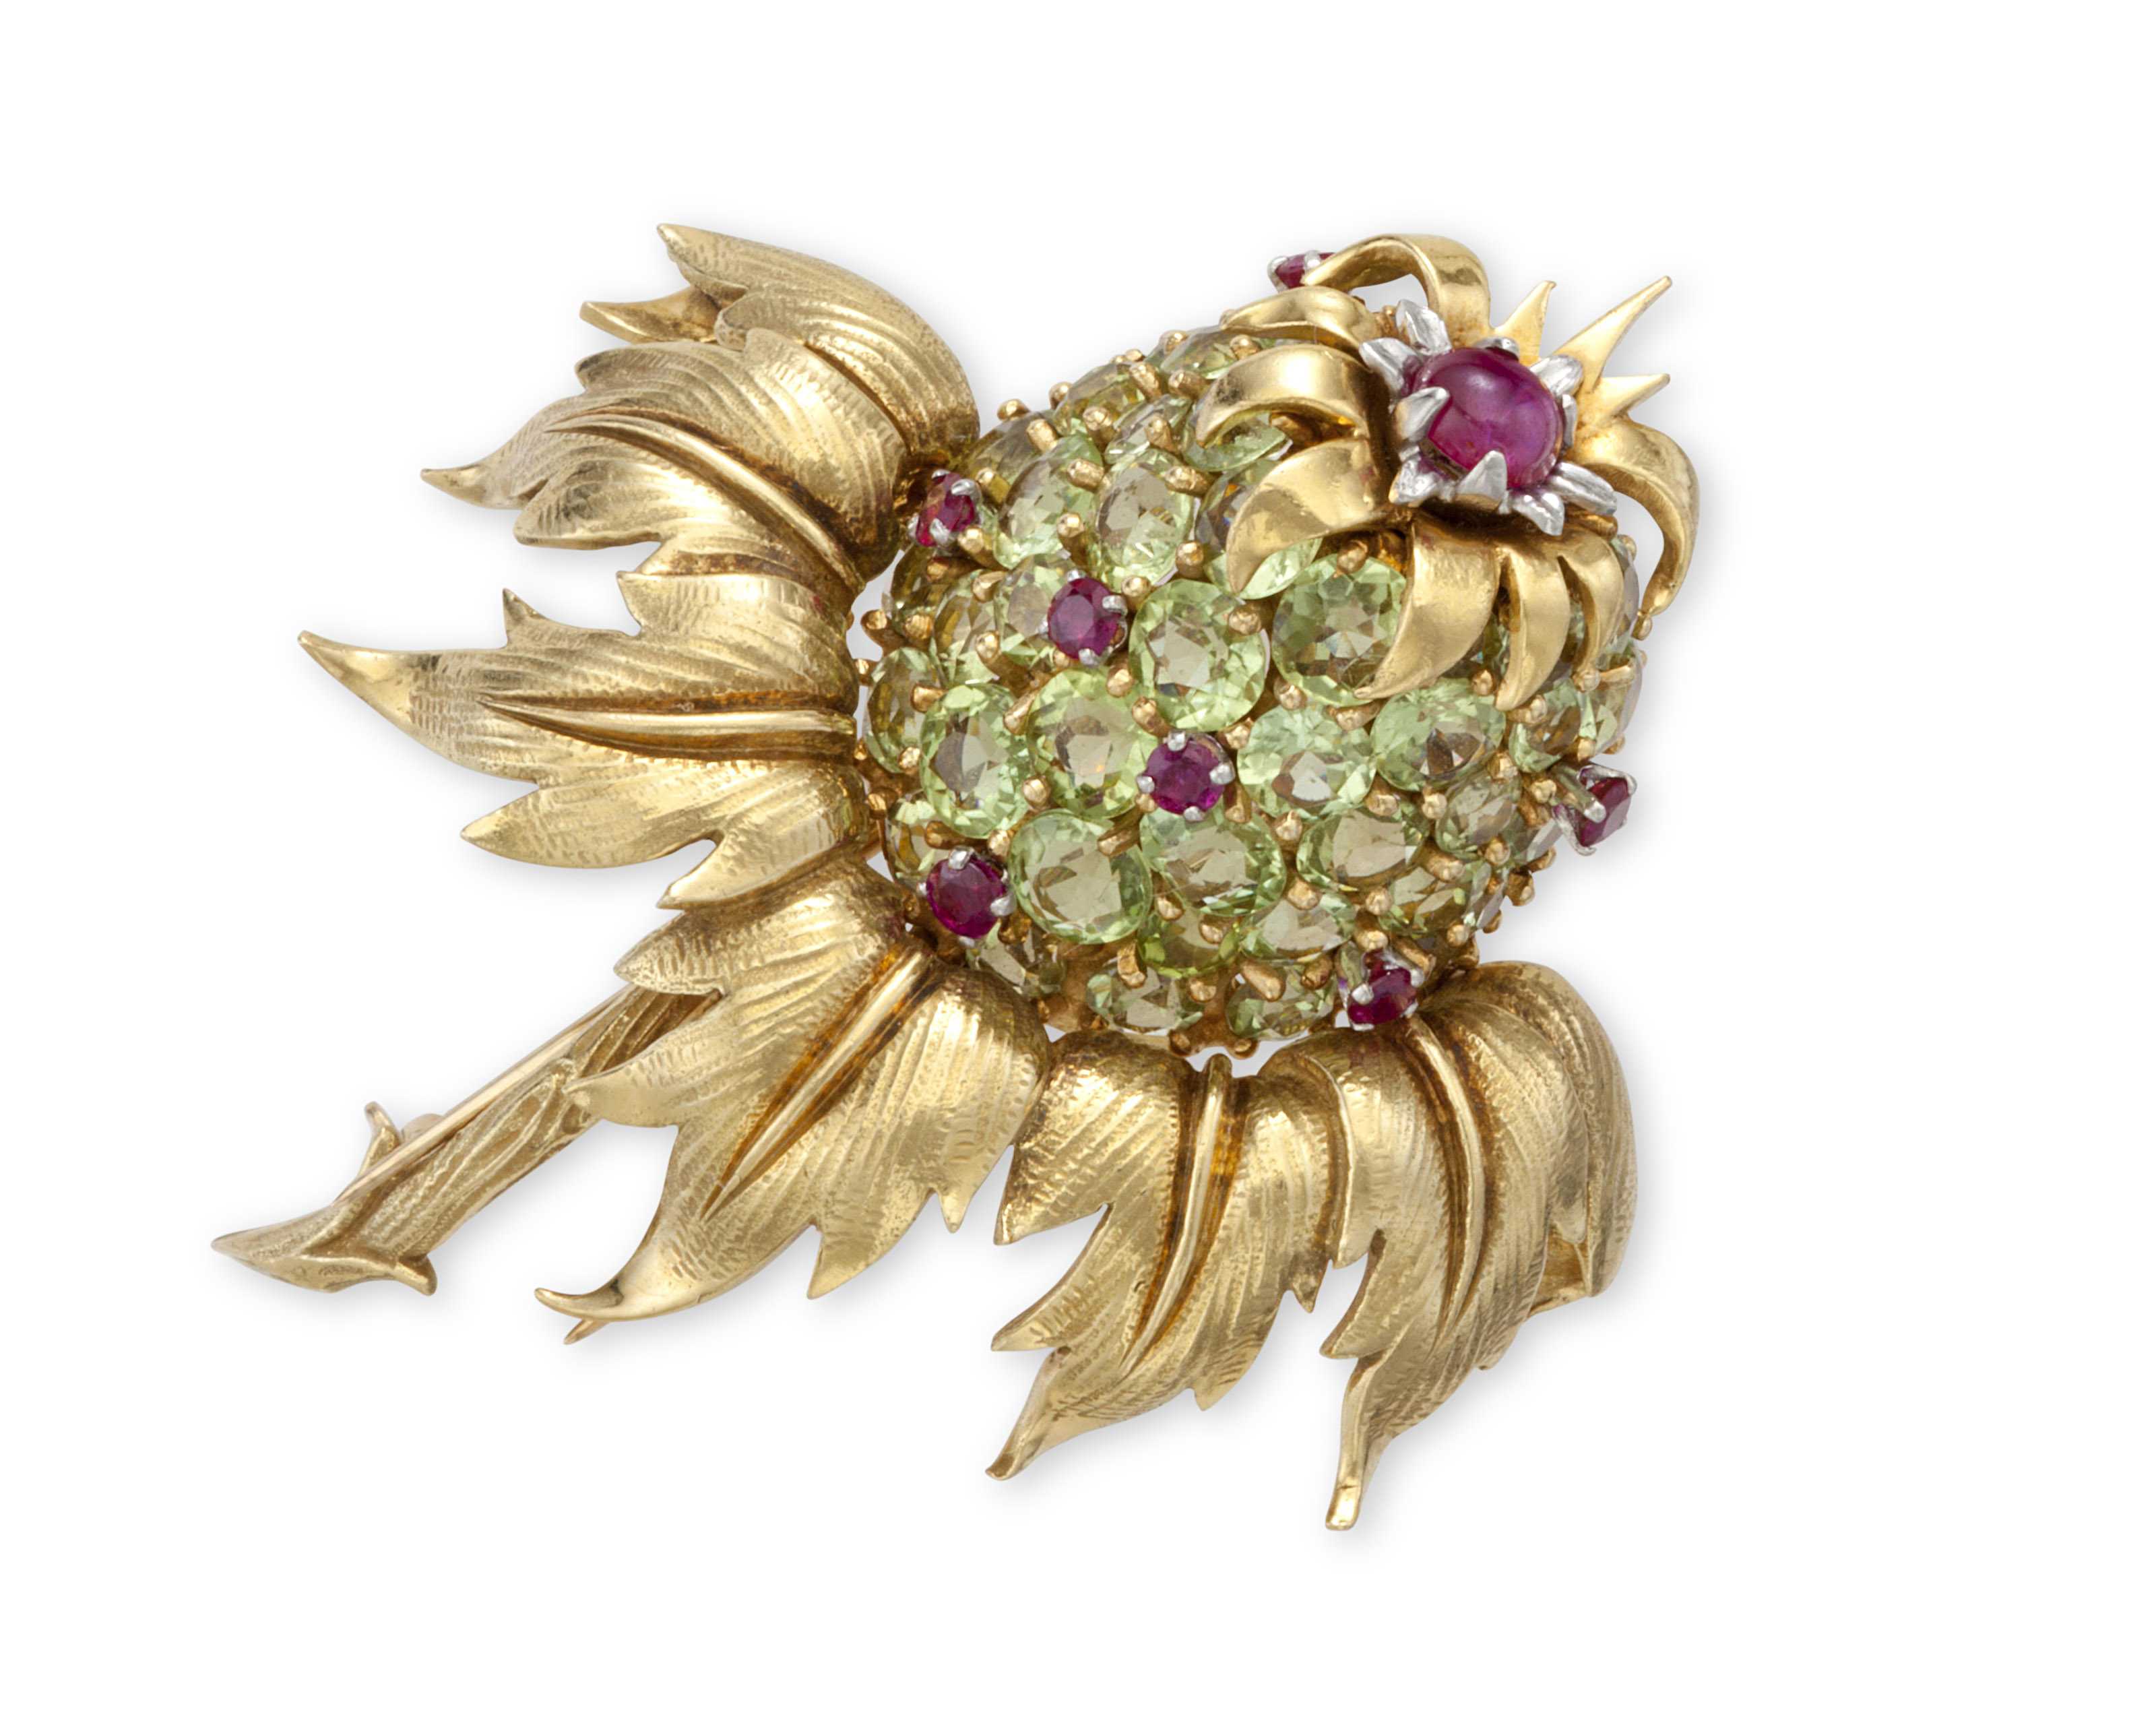 Jewelry continues to convey the language of flowers in sentiment and ...